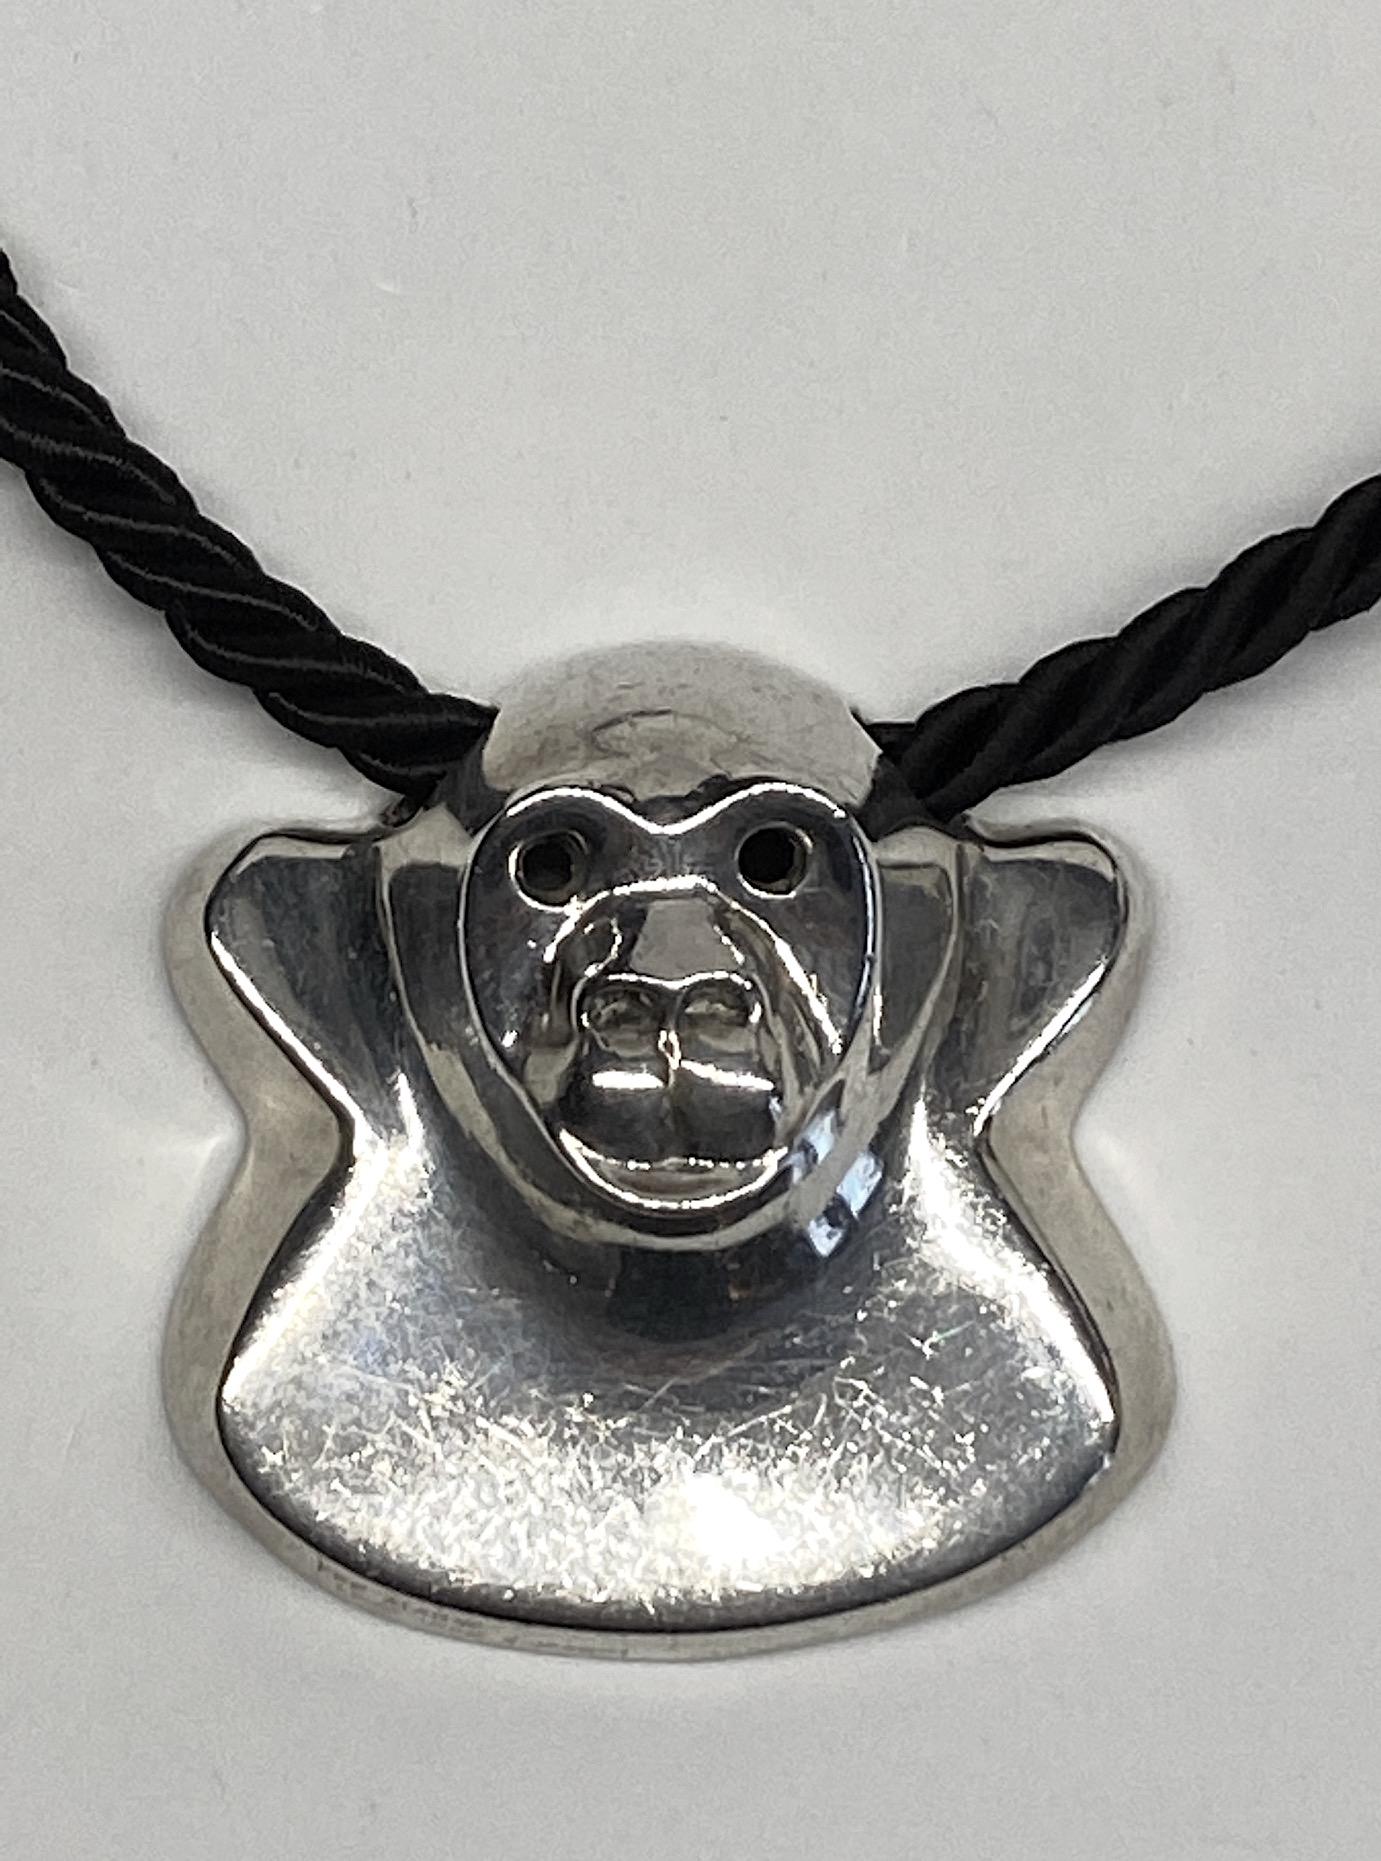 Modernist design sterling silver gorilla pendant part of the zoo series created by New York City jewelry design team Jack Brusca and Joseph Dante in 1976. The pendant is 2 inches wide, 2 inches high and .88 of an inch deep in cast sterling silver.